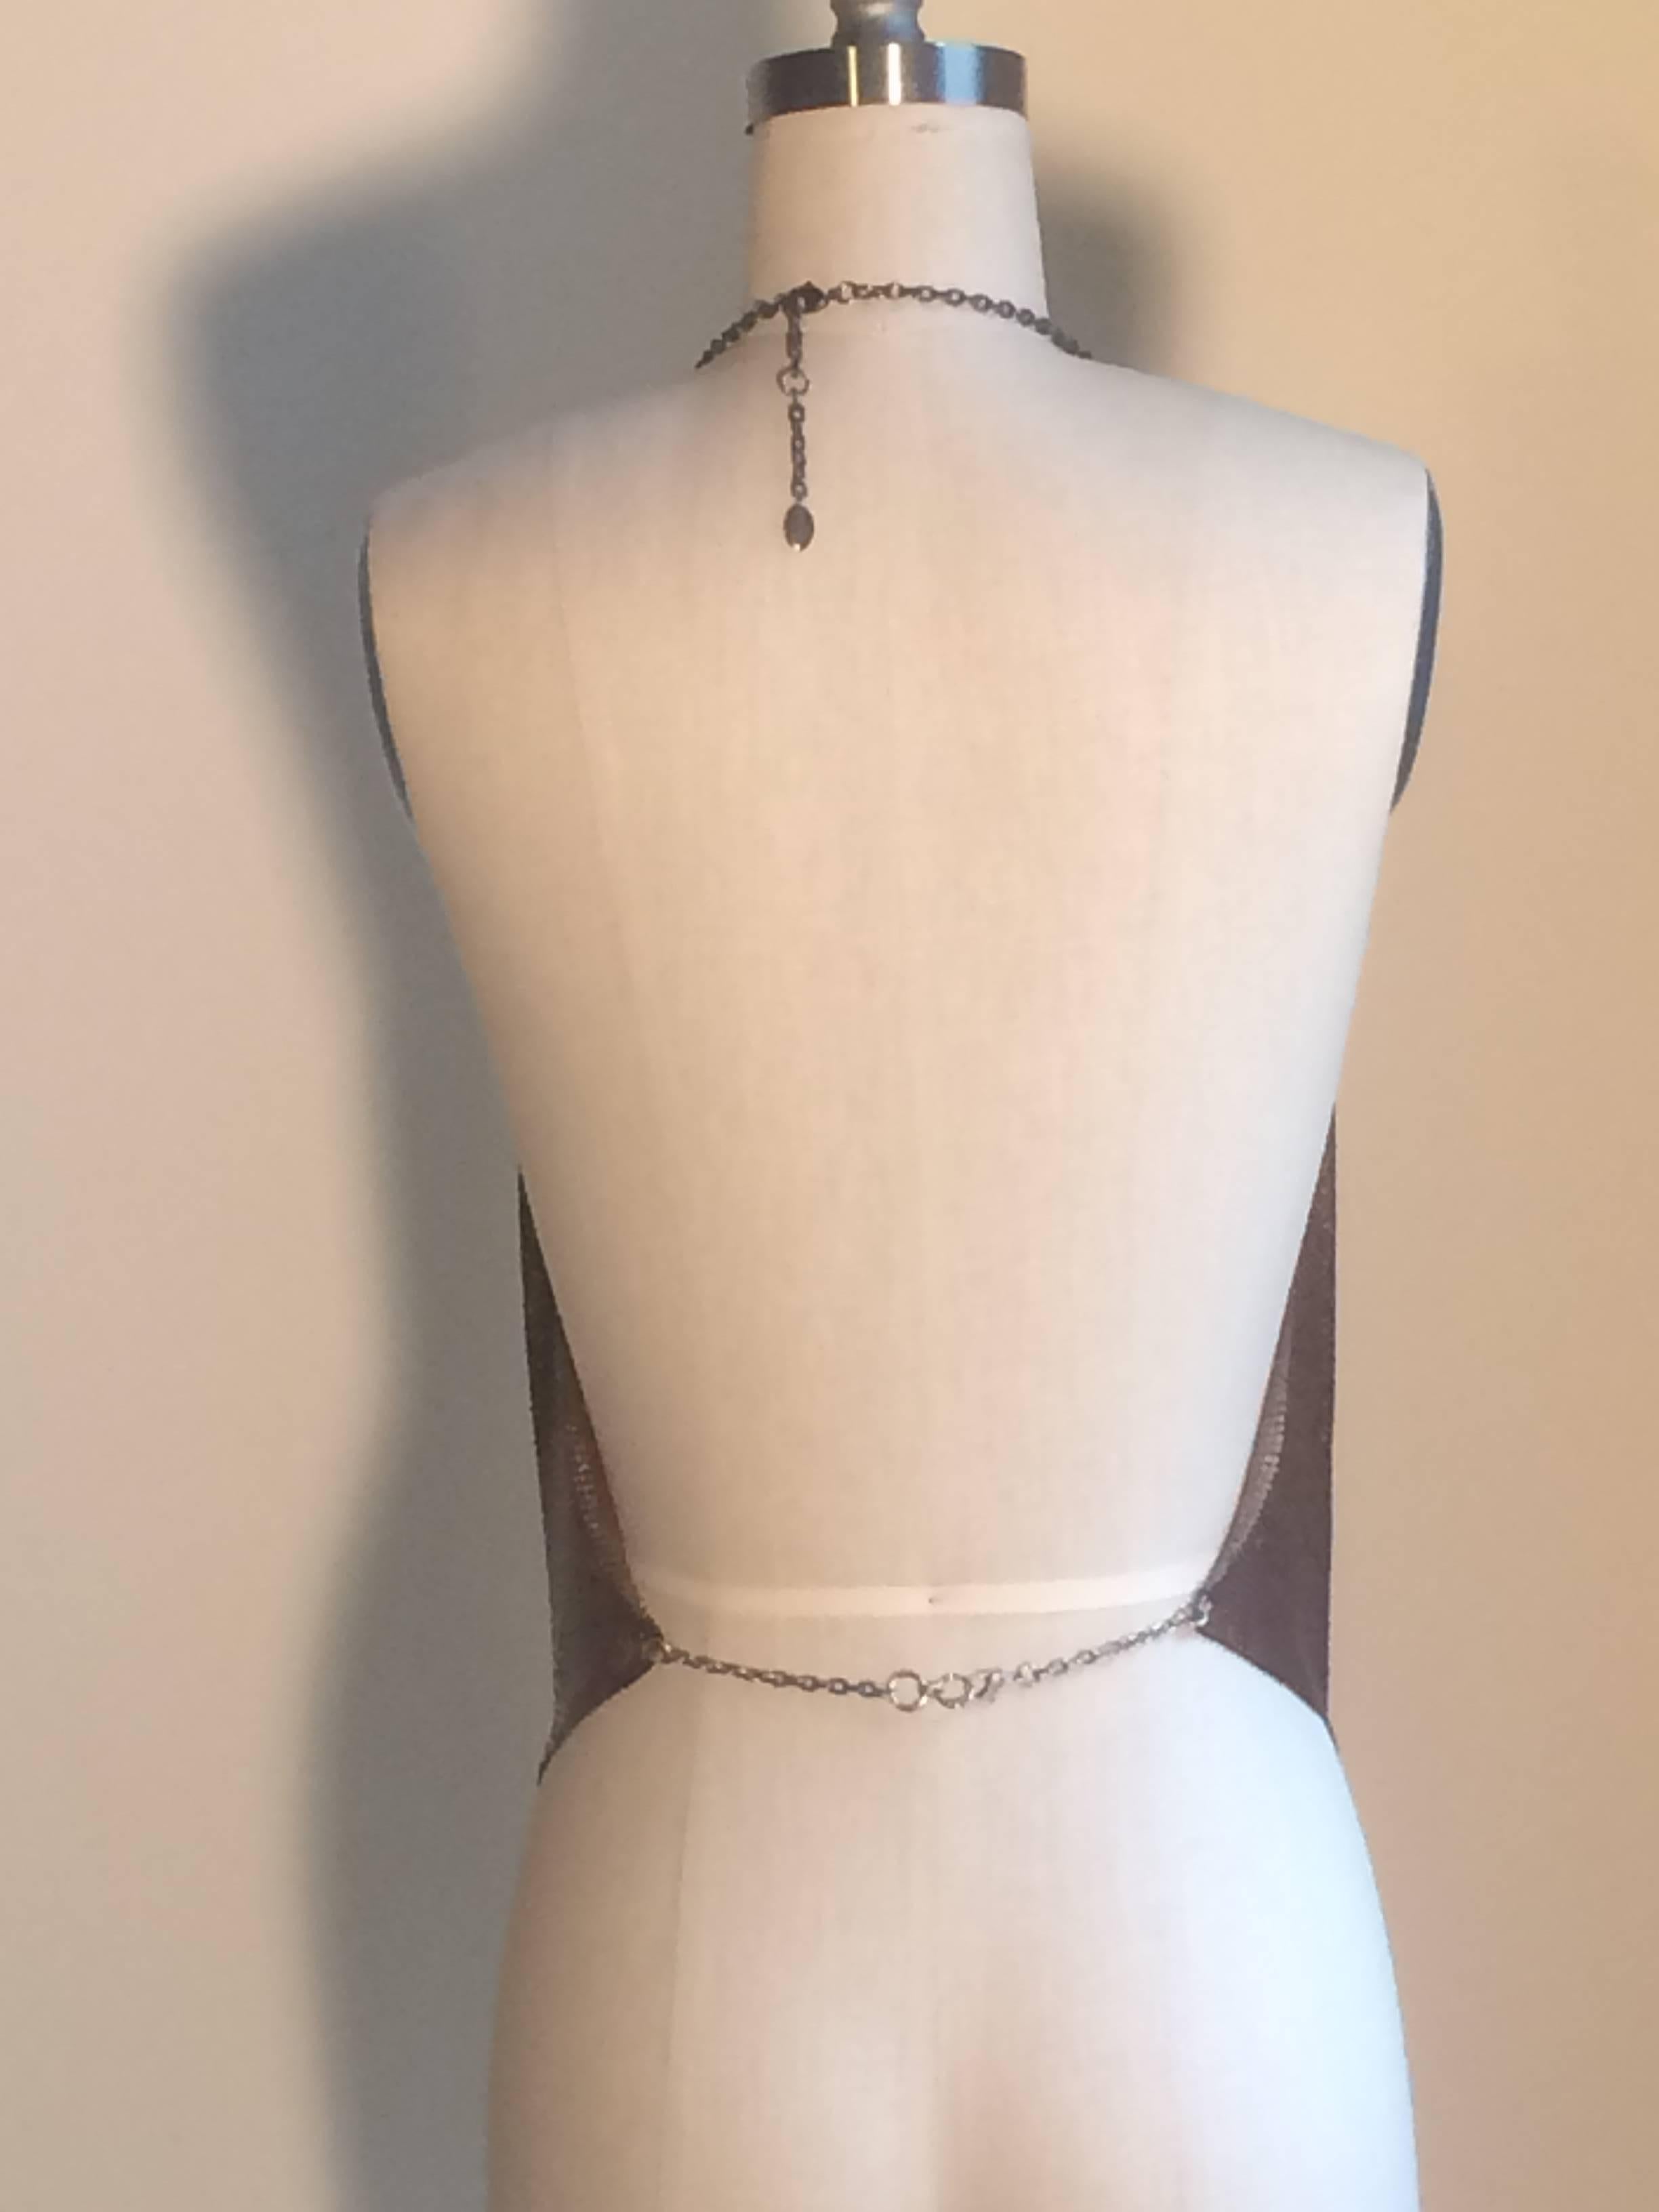 Paco Rabanne iconic signature hand made metal mesh backless halter tank in copper tone mesh with silver ring detail at bust. Chain fasteners at back neck and lower back. Labelled Paco Rabanne Paris at metal tag on neck chain.

Size 40, fits like